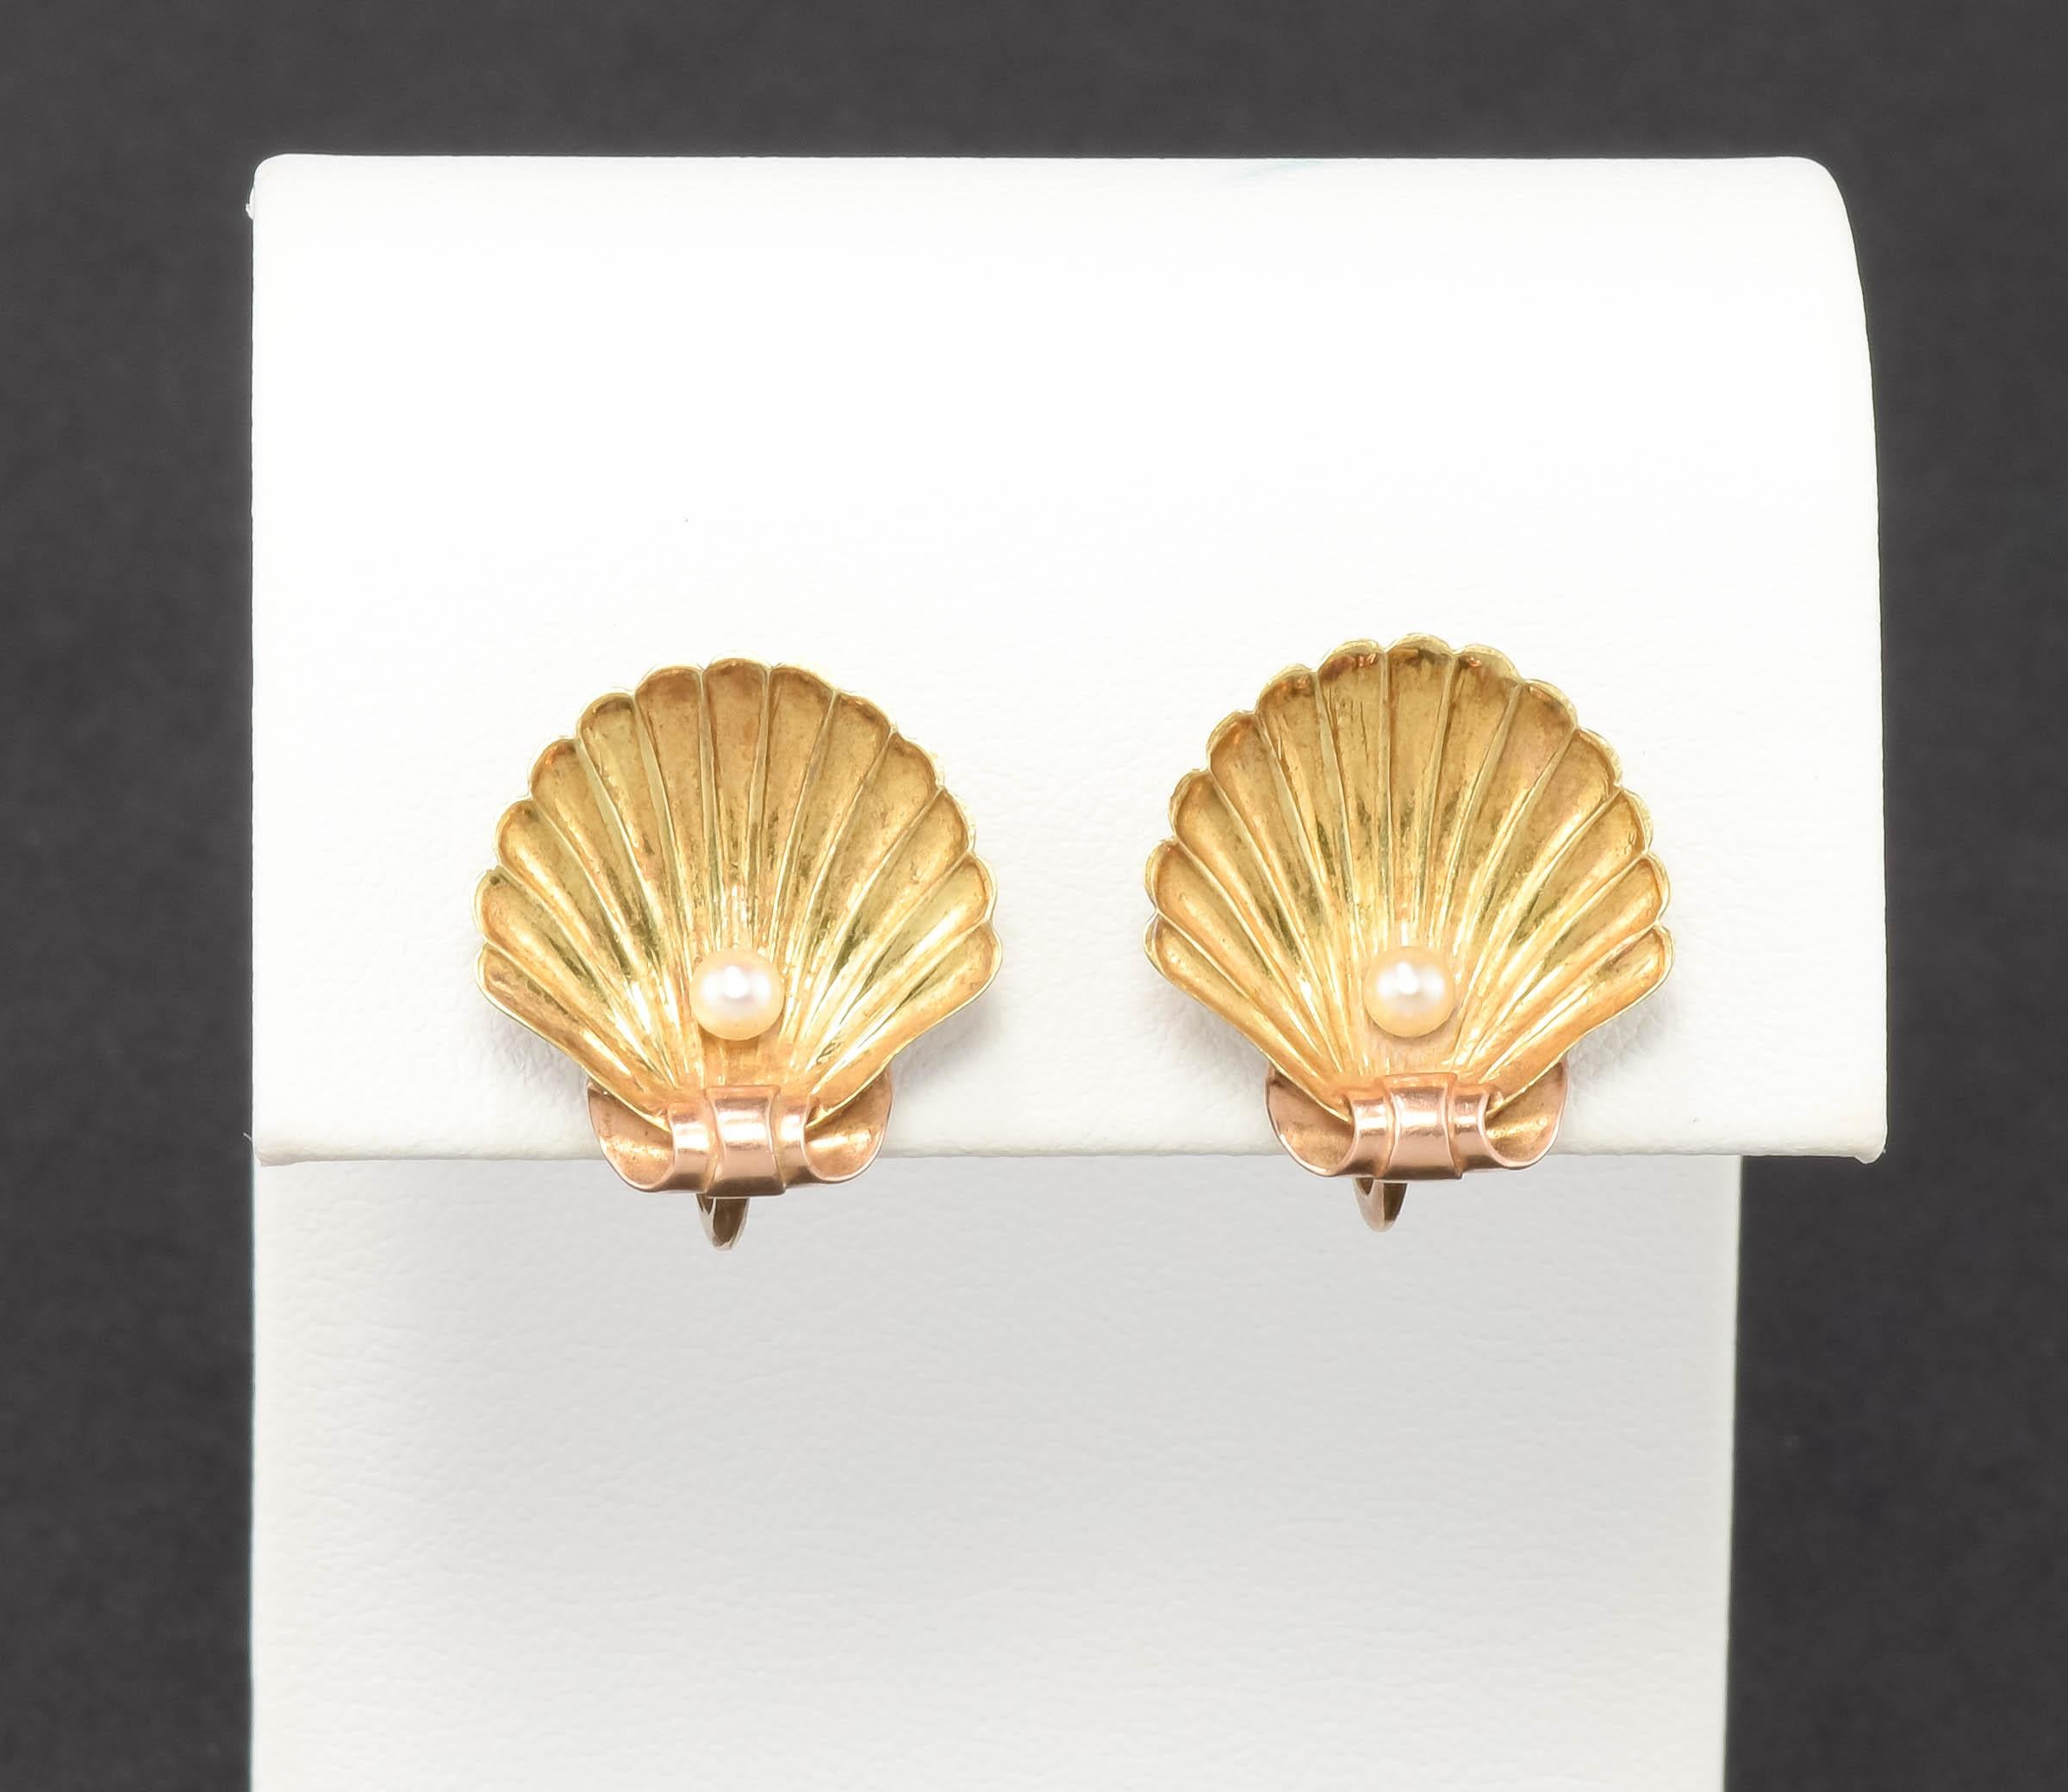 Antique 14K Gold Shell Earrings w Pearls by Sloan & Co. French Screw Back Style For Sale 7